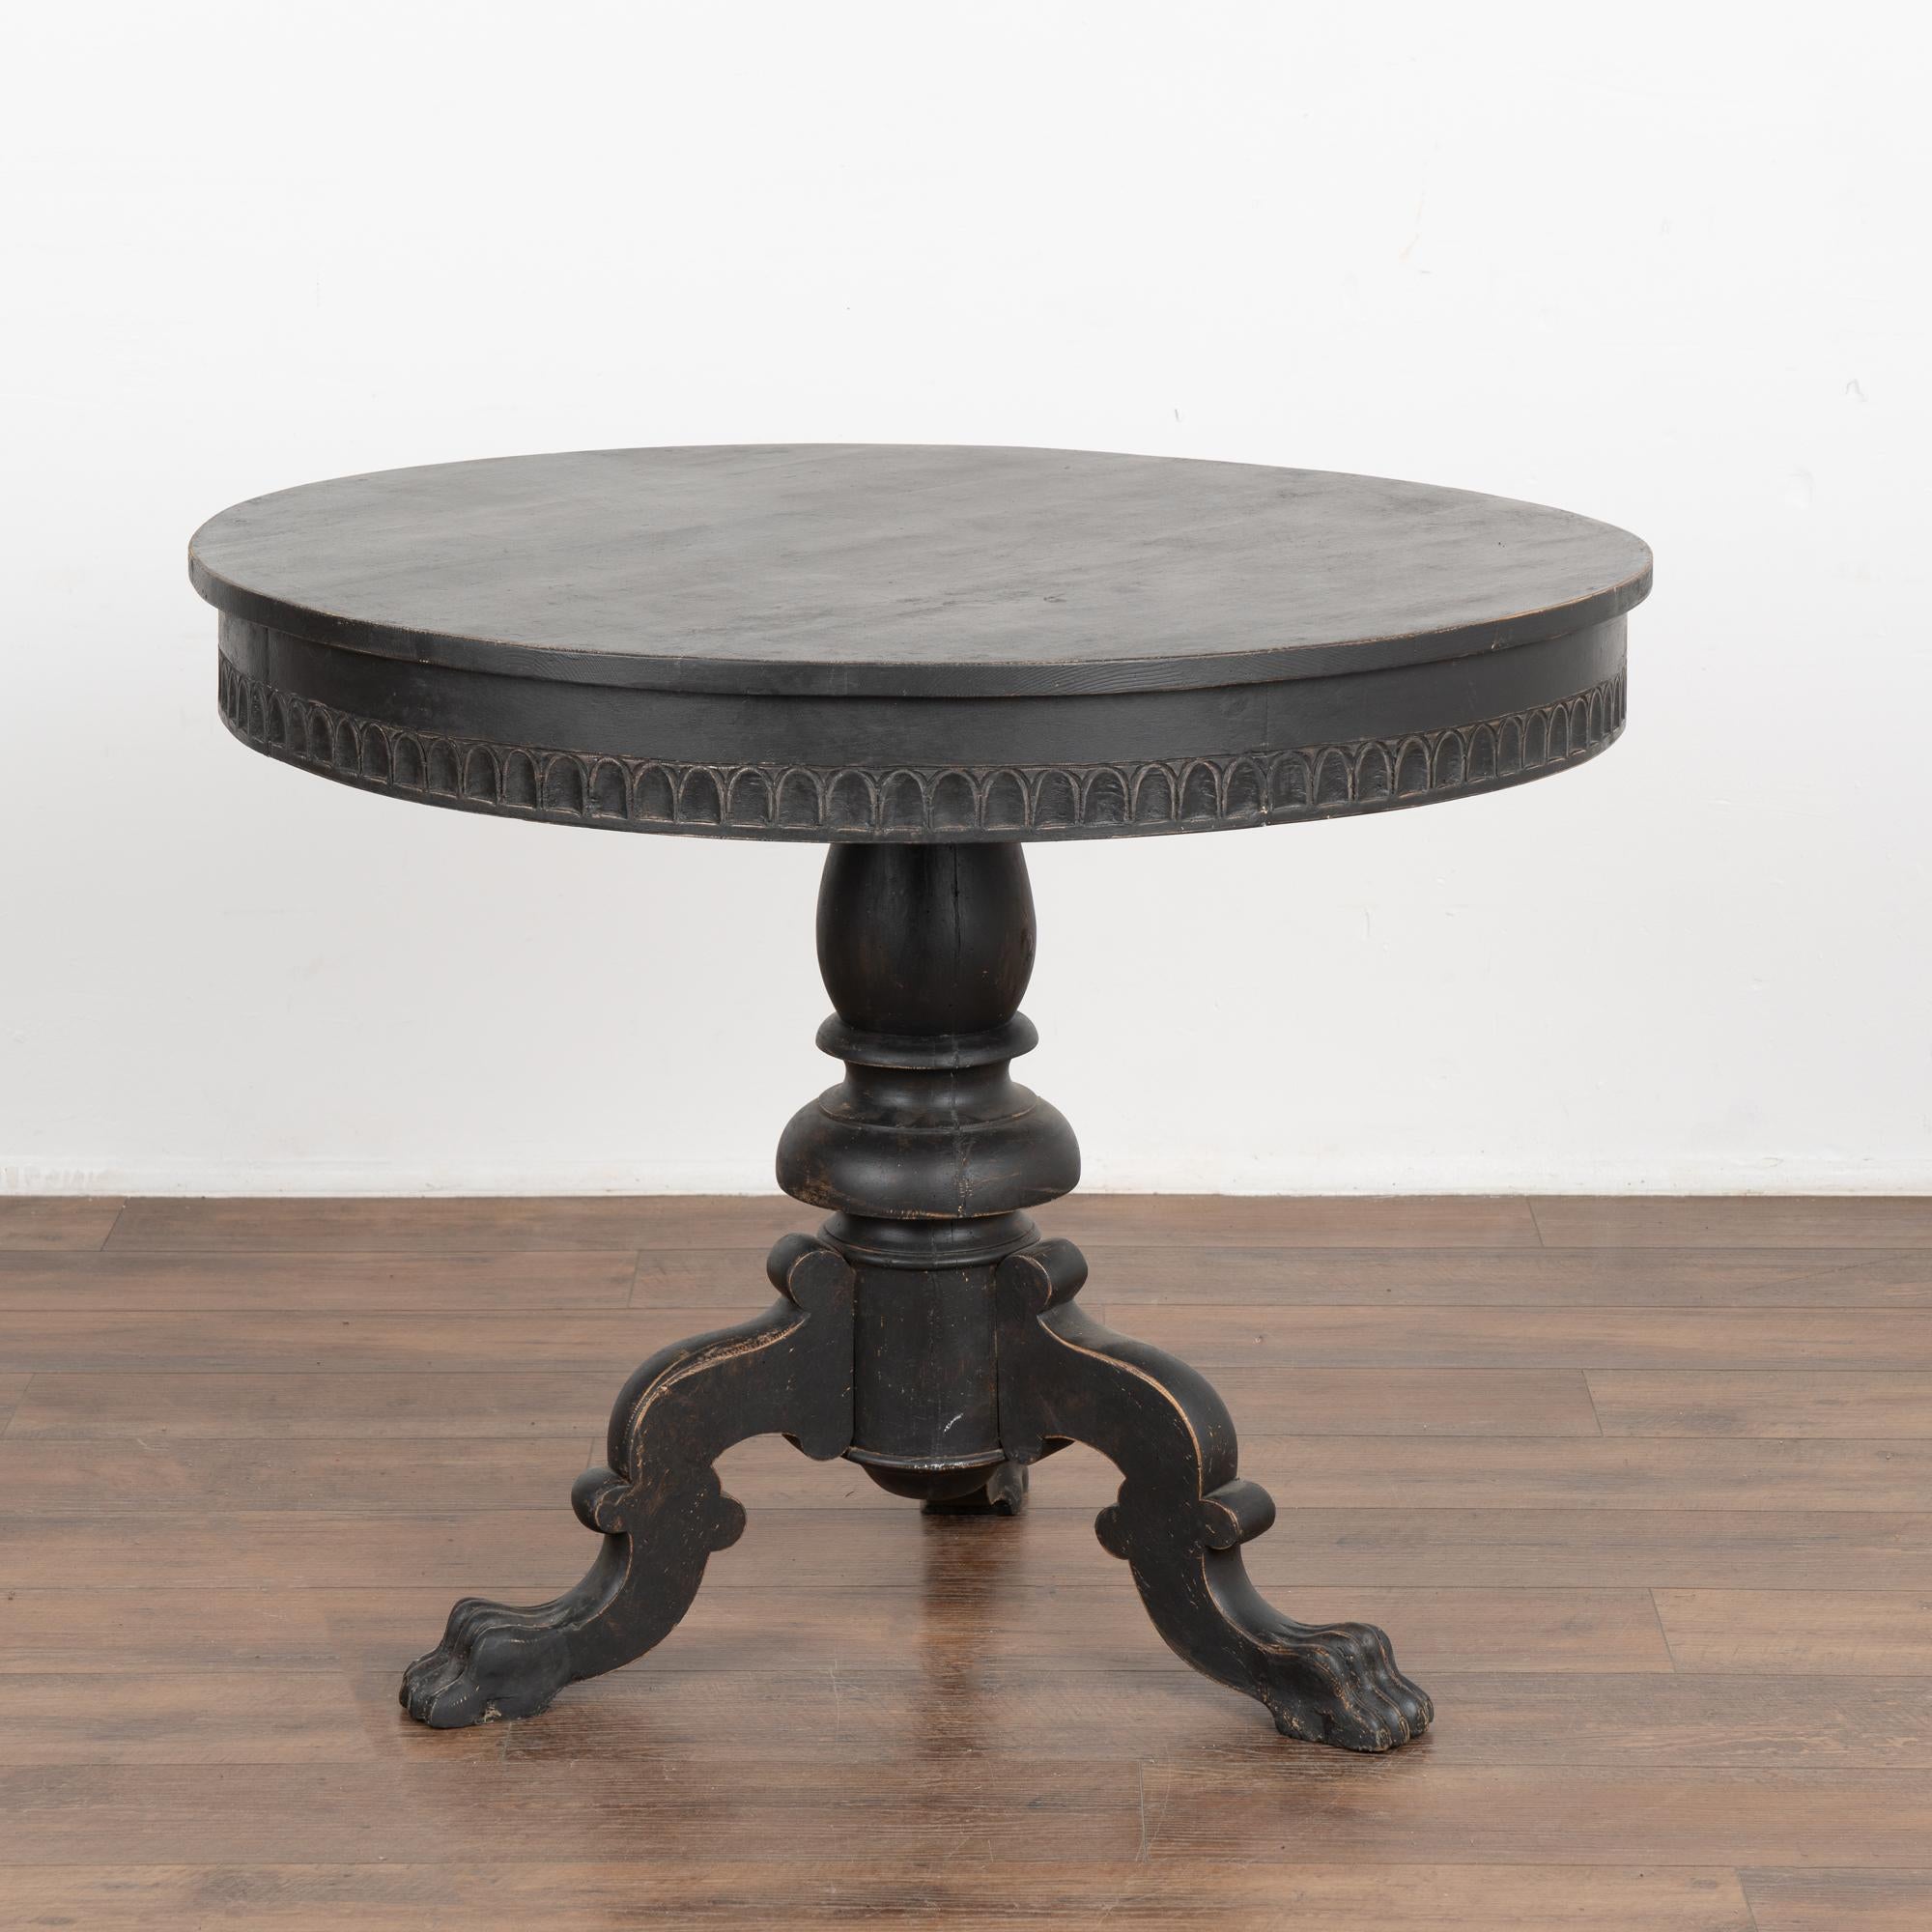 This round pine pedestal table has a carved skirt, turned pedestal base and decoratively carved tripod legs which were a traditional style in Sweden.
Restored, later professionally painted in layered shades of black and lightly distressed to fit the